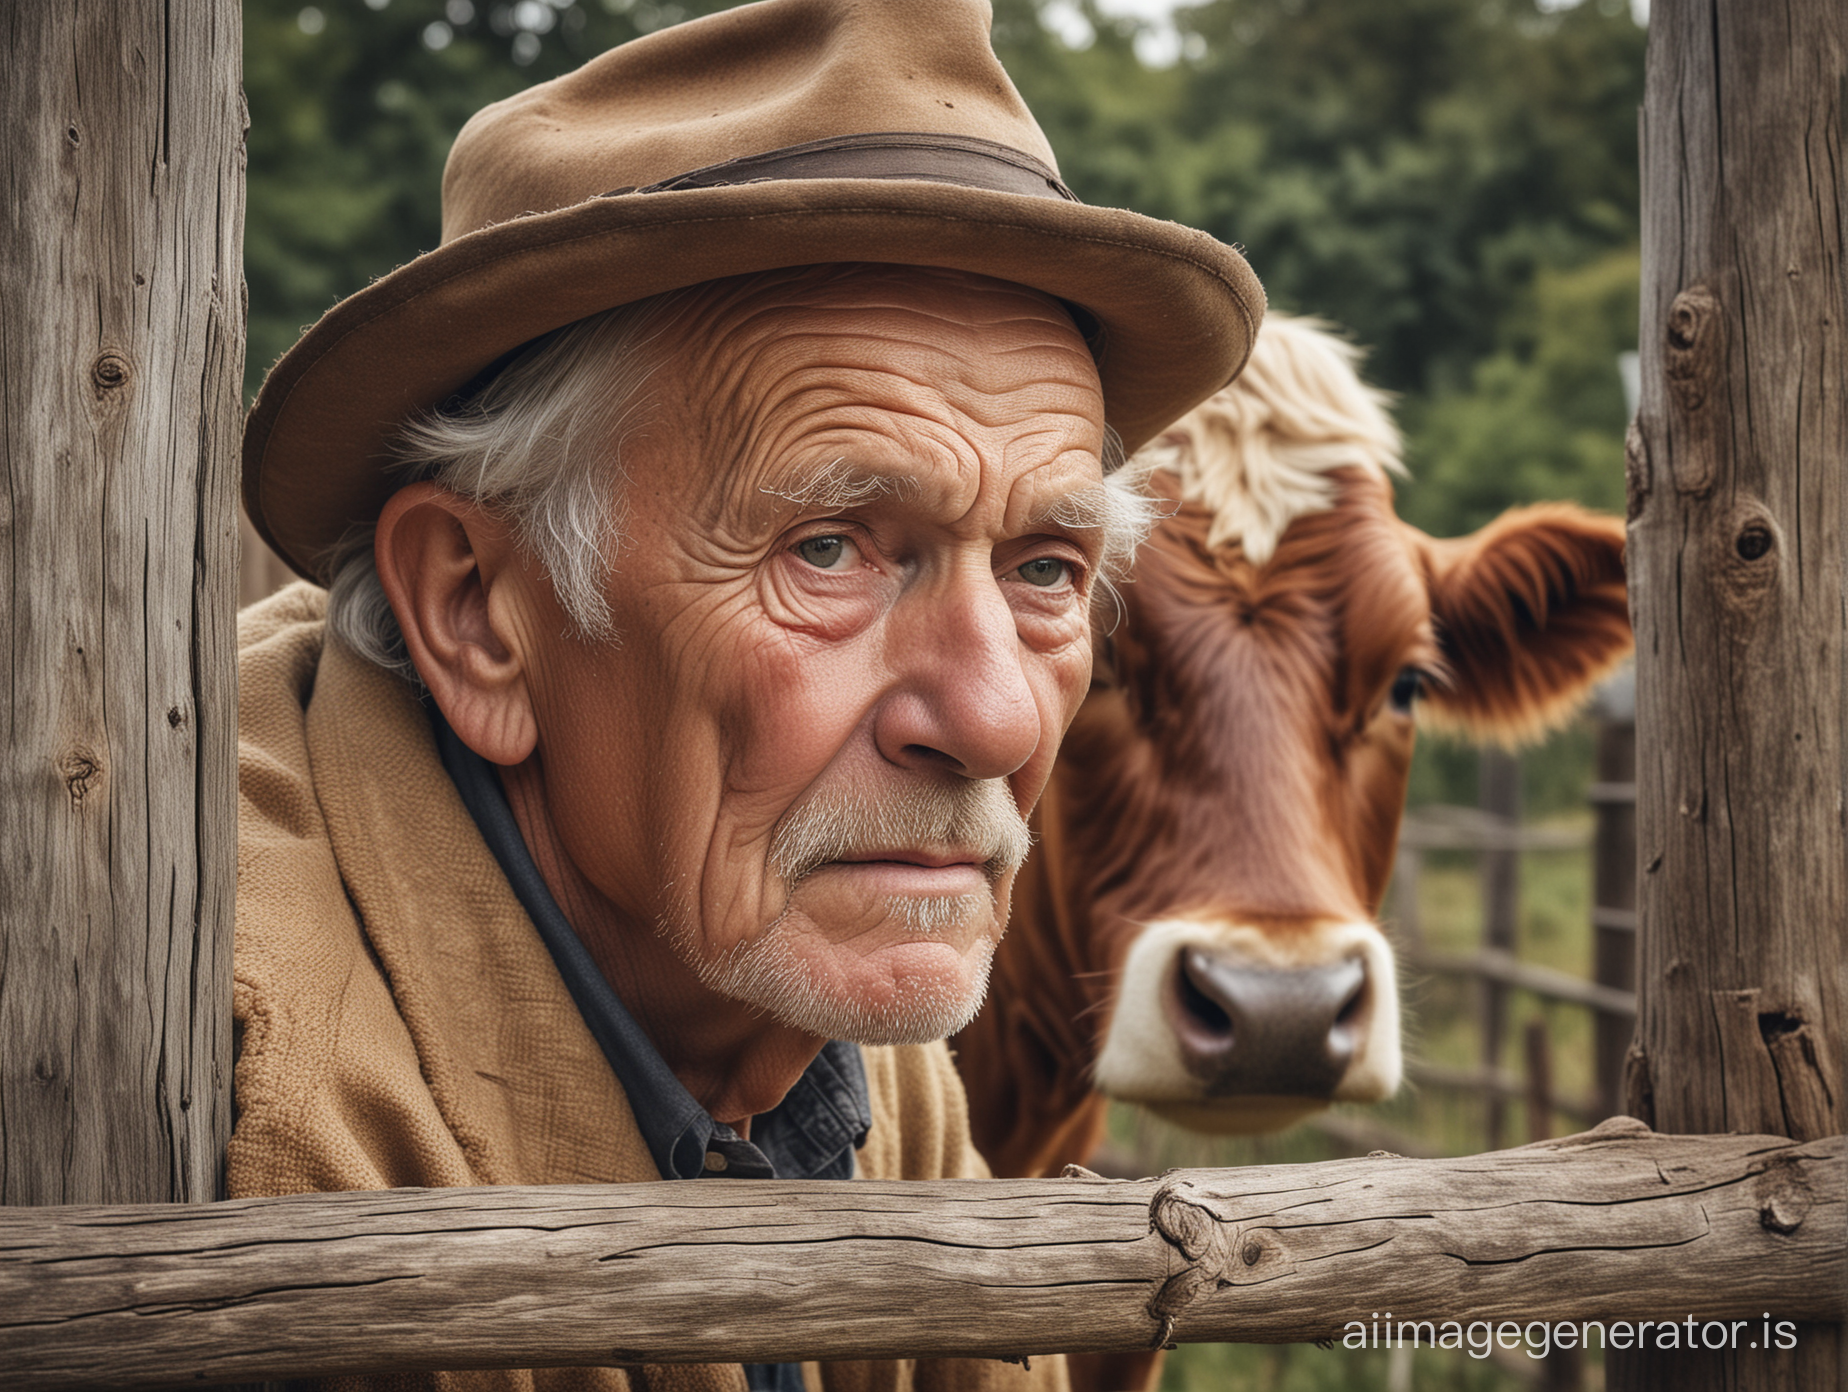 A detailed photograph of an old man with a wrinkled face and a thoughtful look about the meaning of life in simple rustic clothes near a wooden fence. There is a cow next to the old man